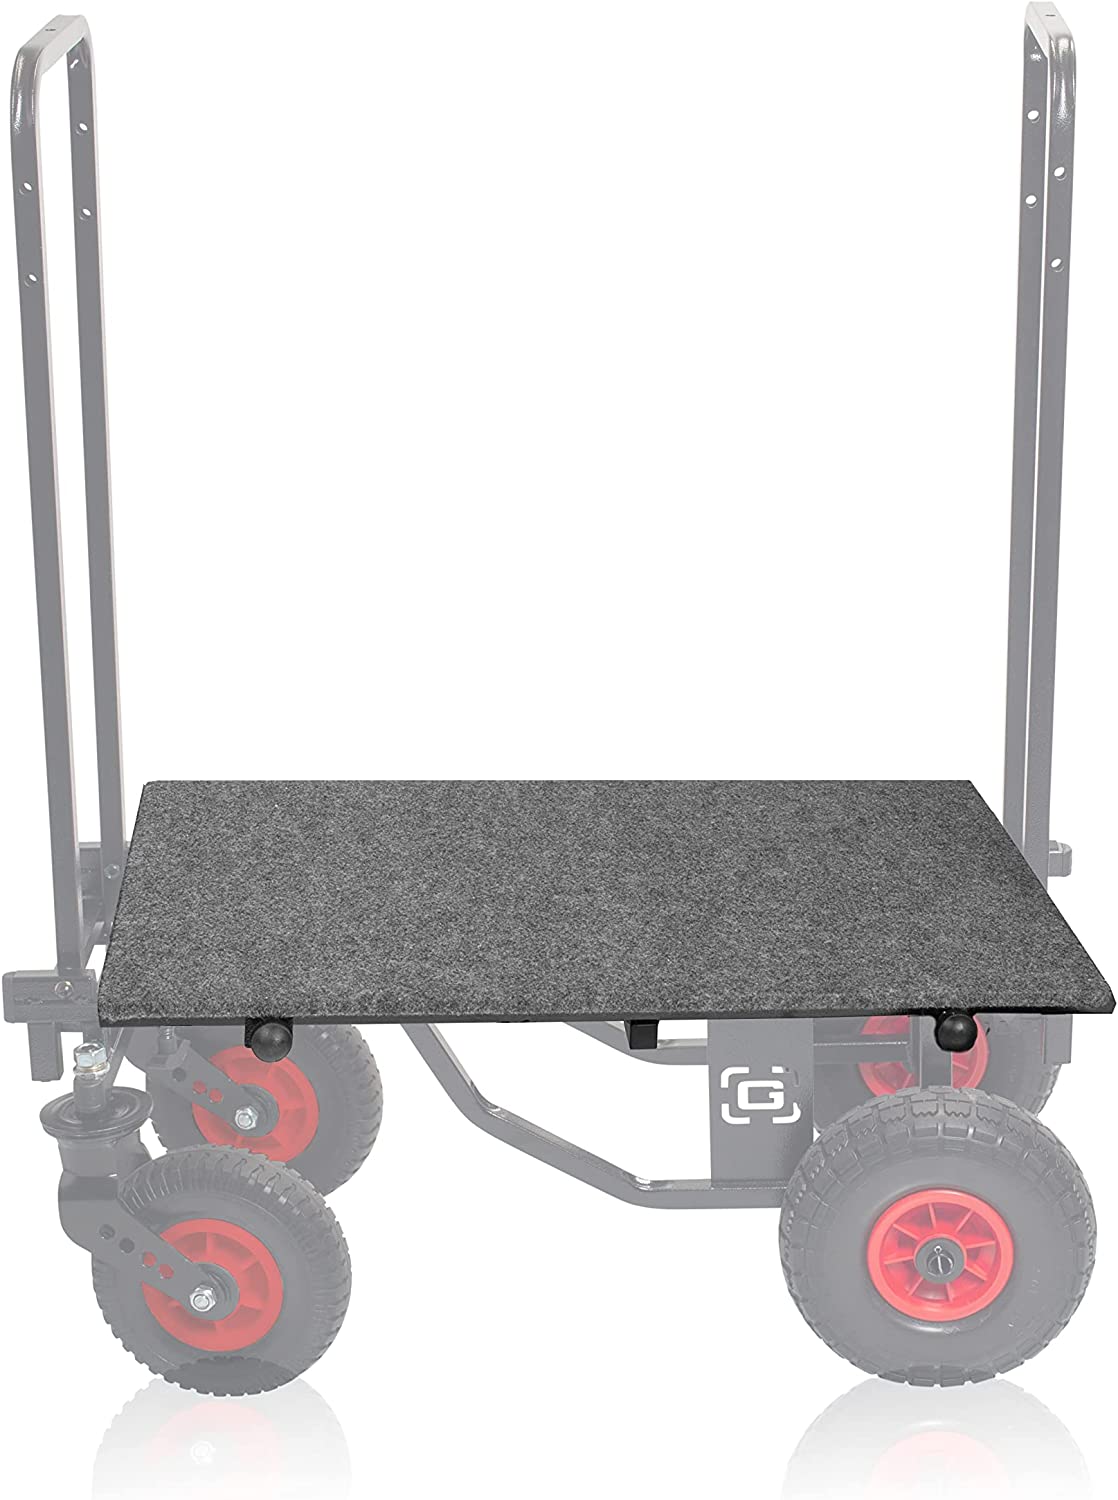 Gator GFW-UTL-CART-LD Lower Deck Flat Surface for Utility Carts